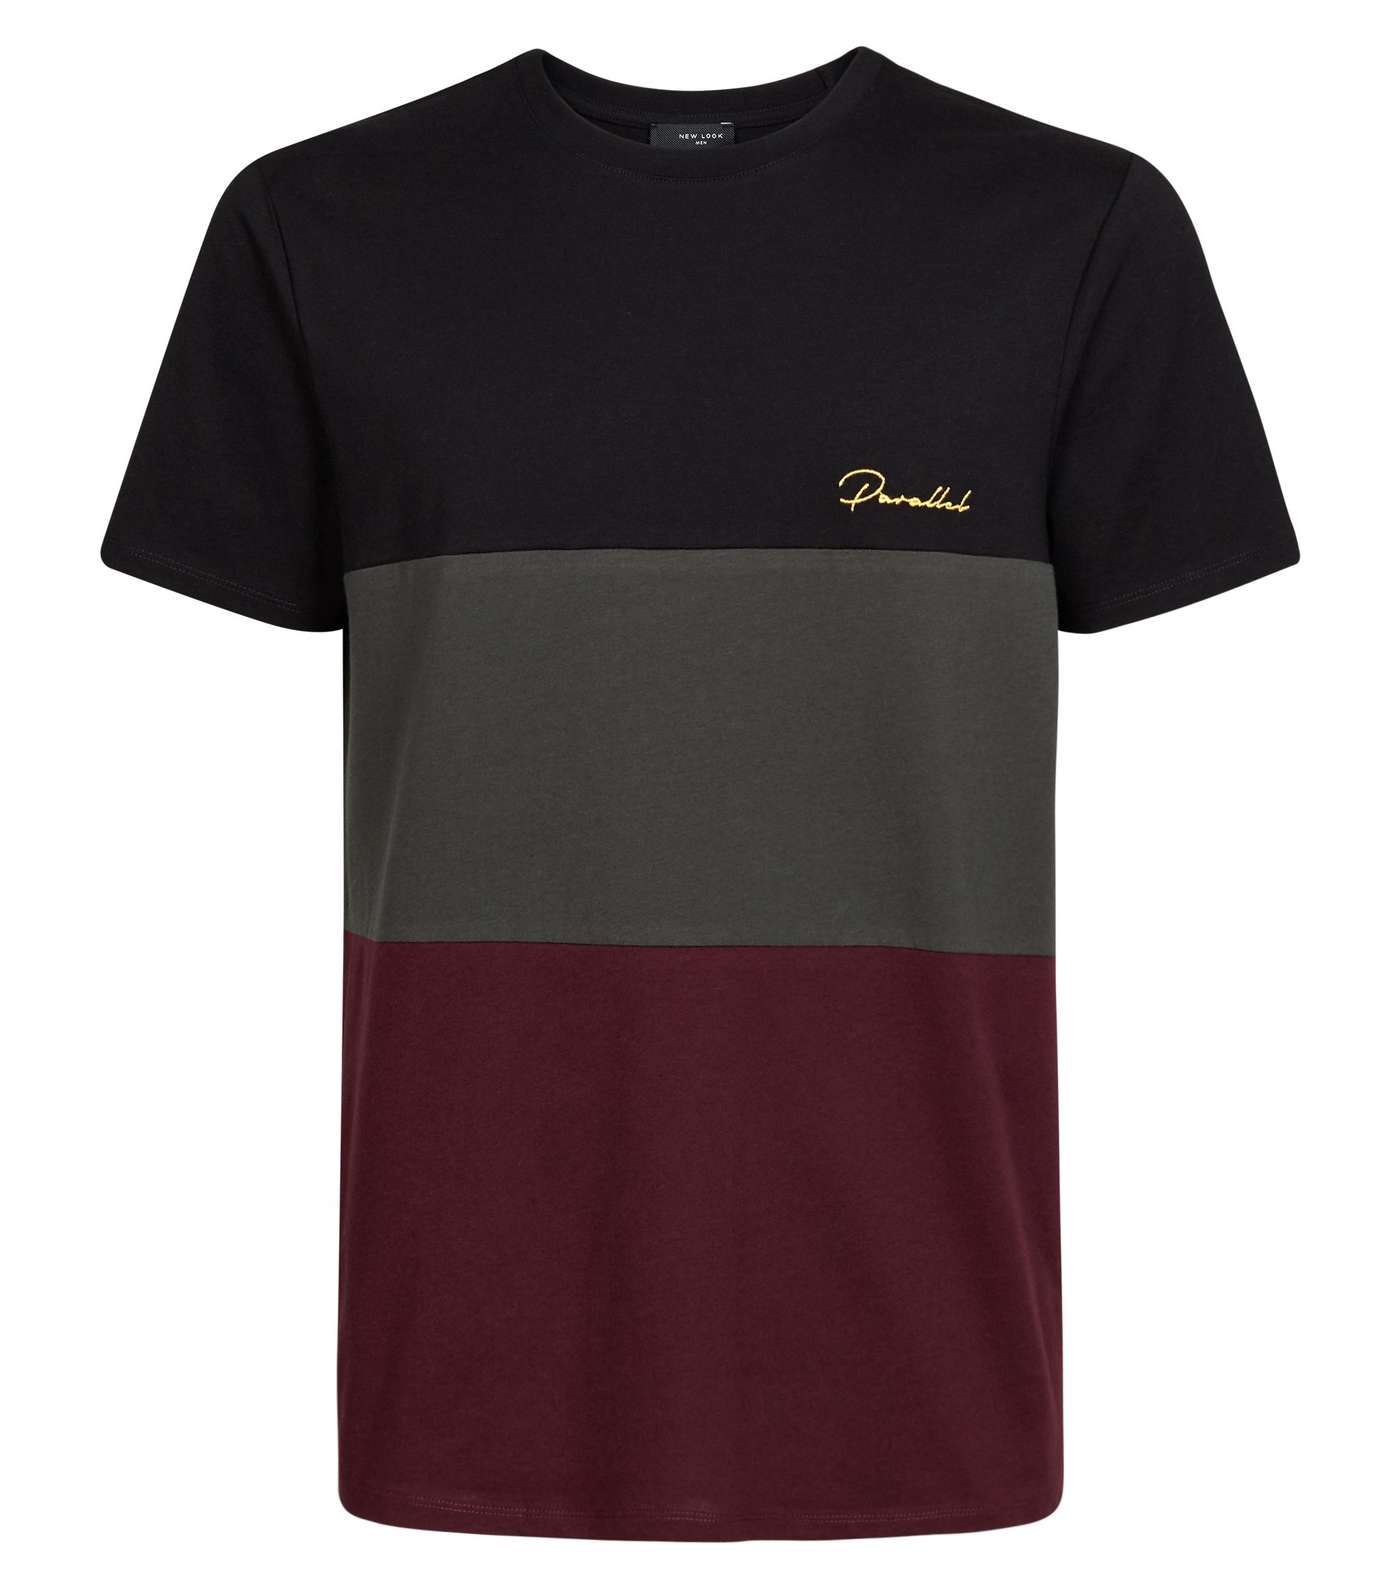 Burgundy Colour Block Parallel Embroidered T-Shirt Image 4